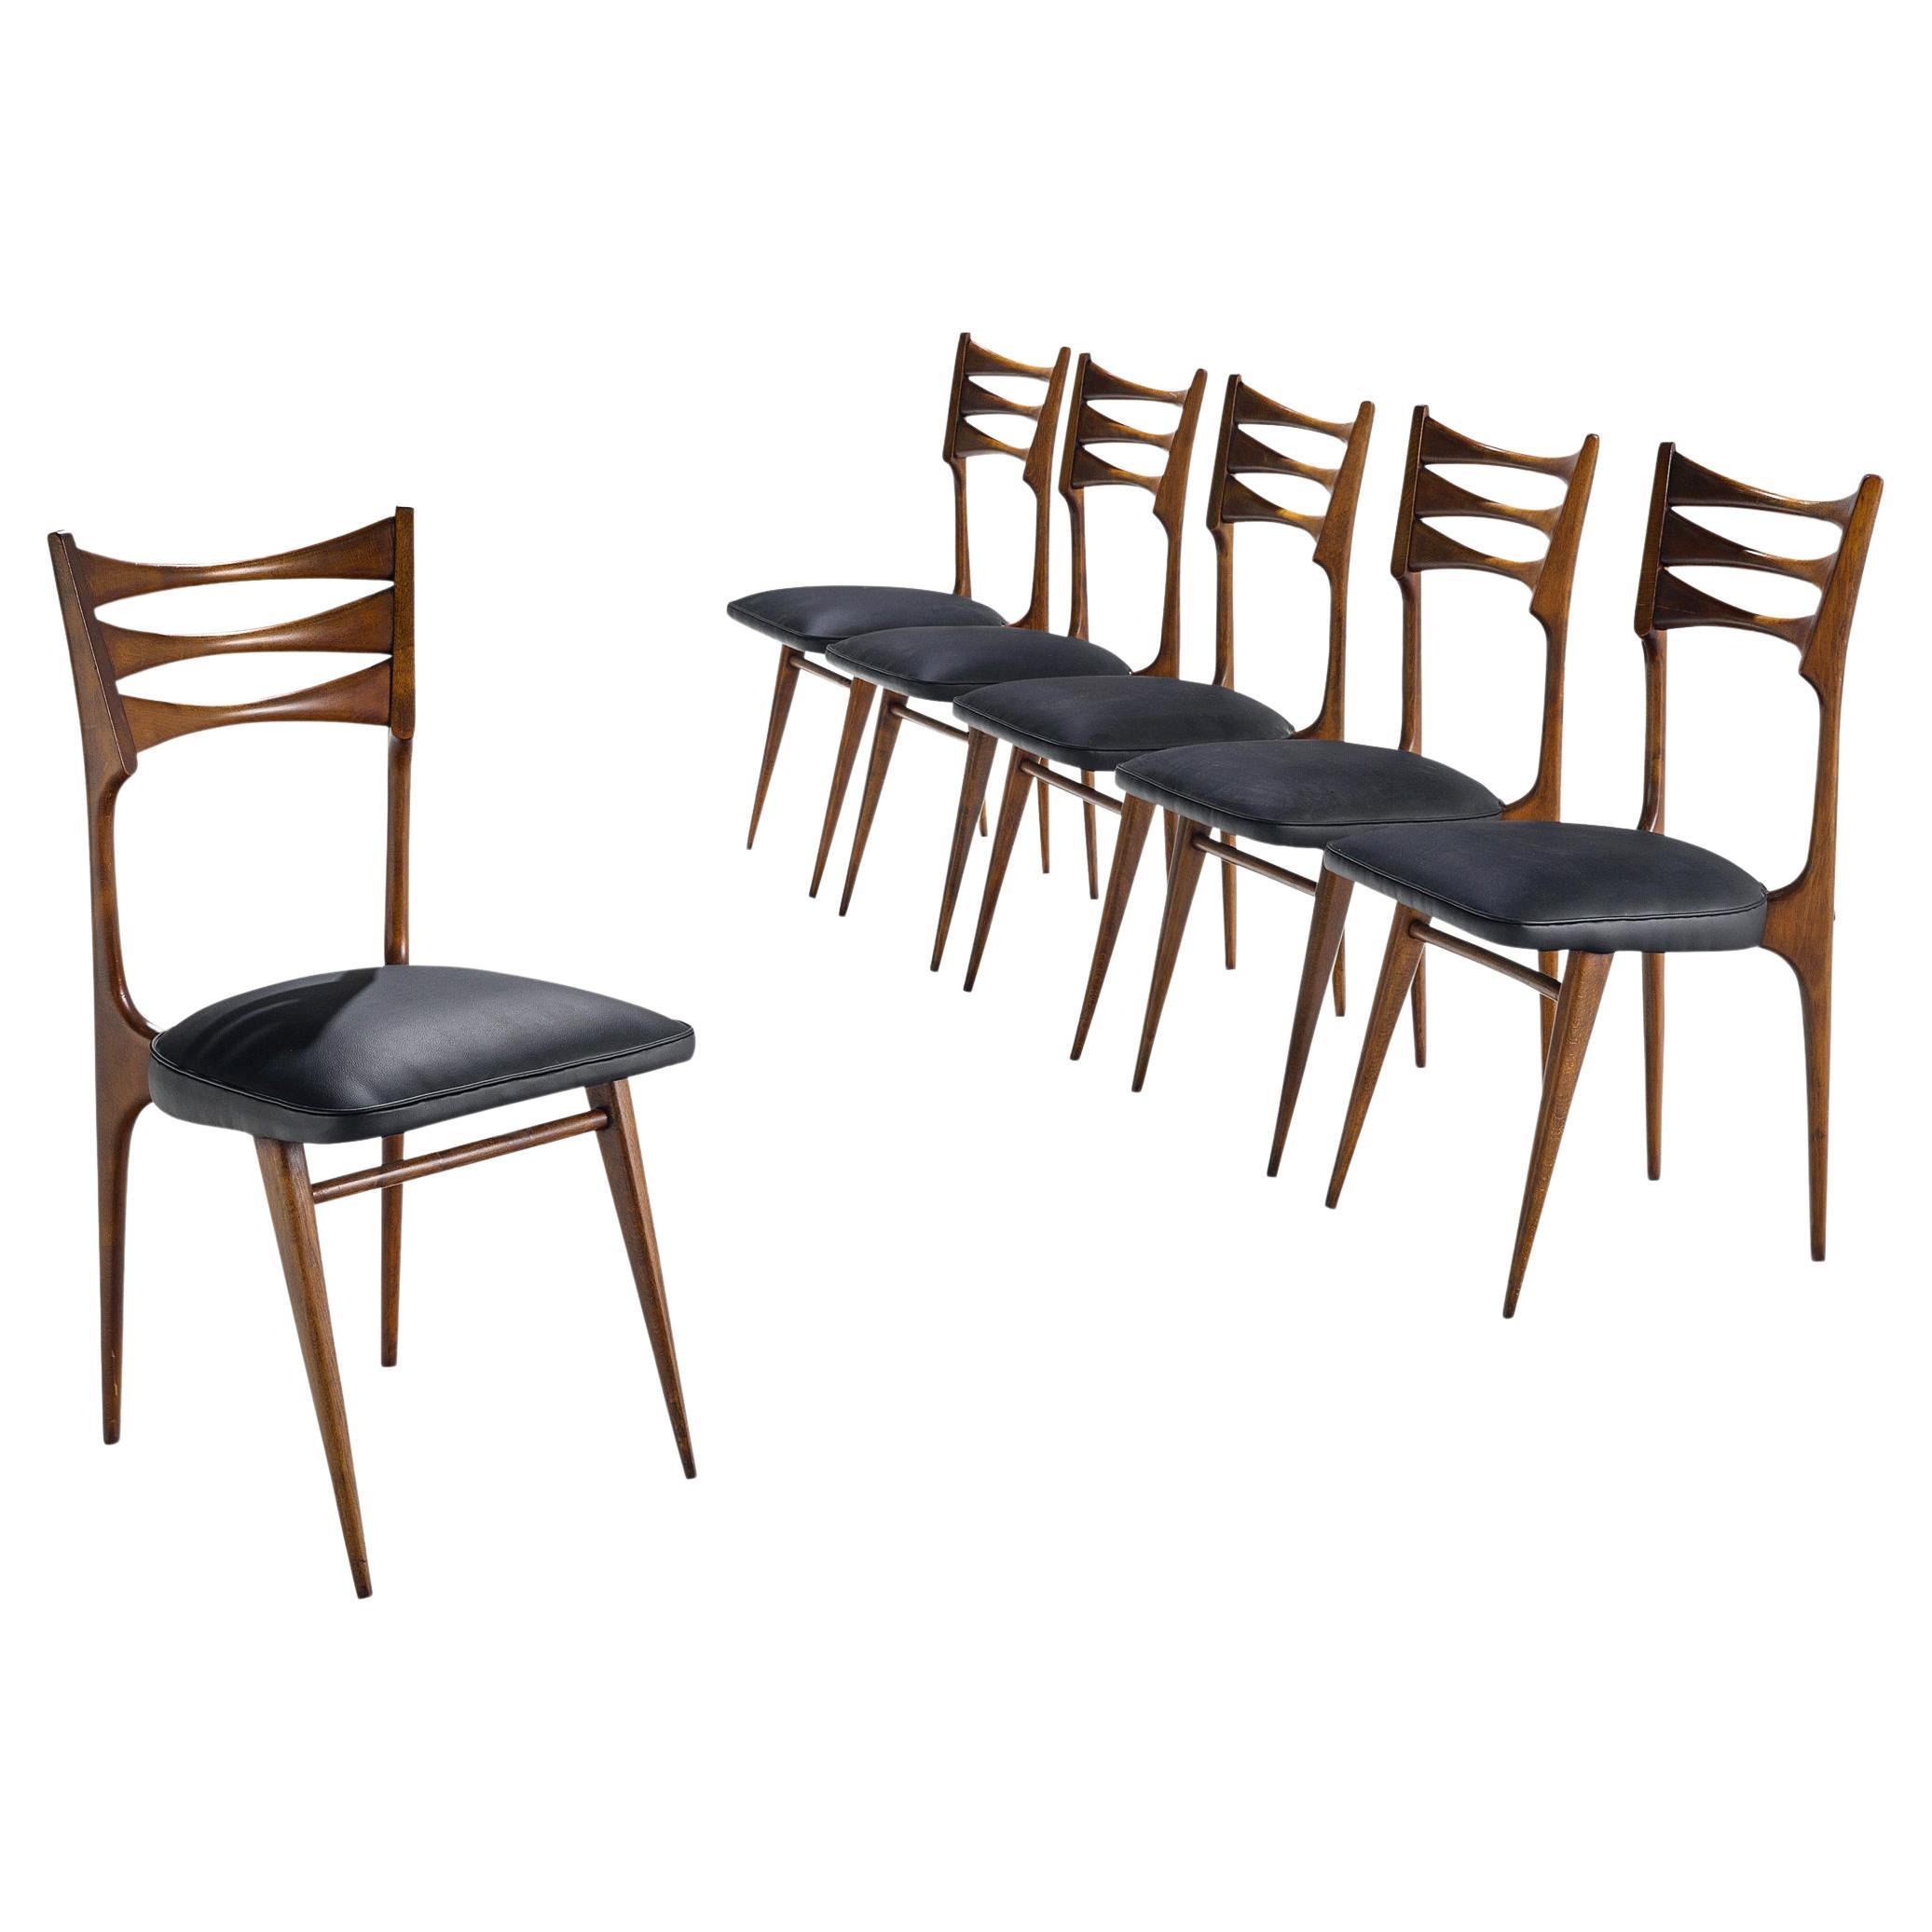 Italian Set of Six Sculptural Dining Chairs in Walnut and Leatherette